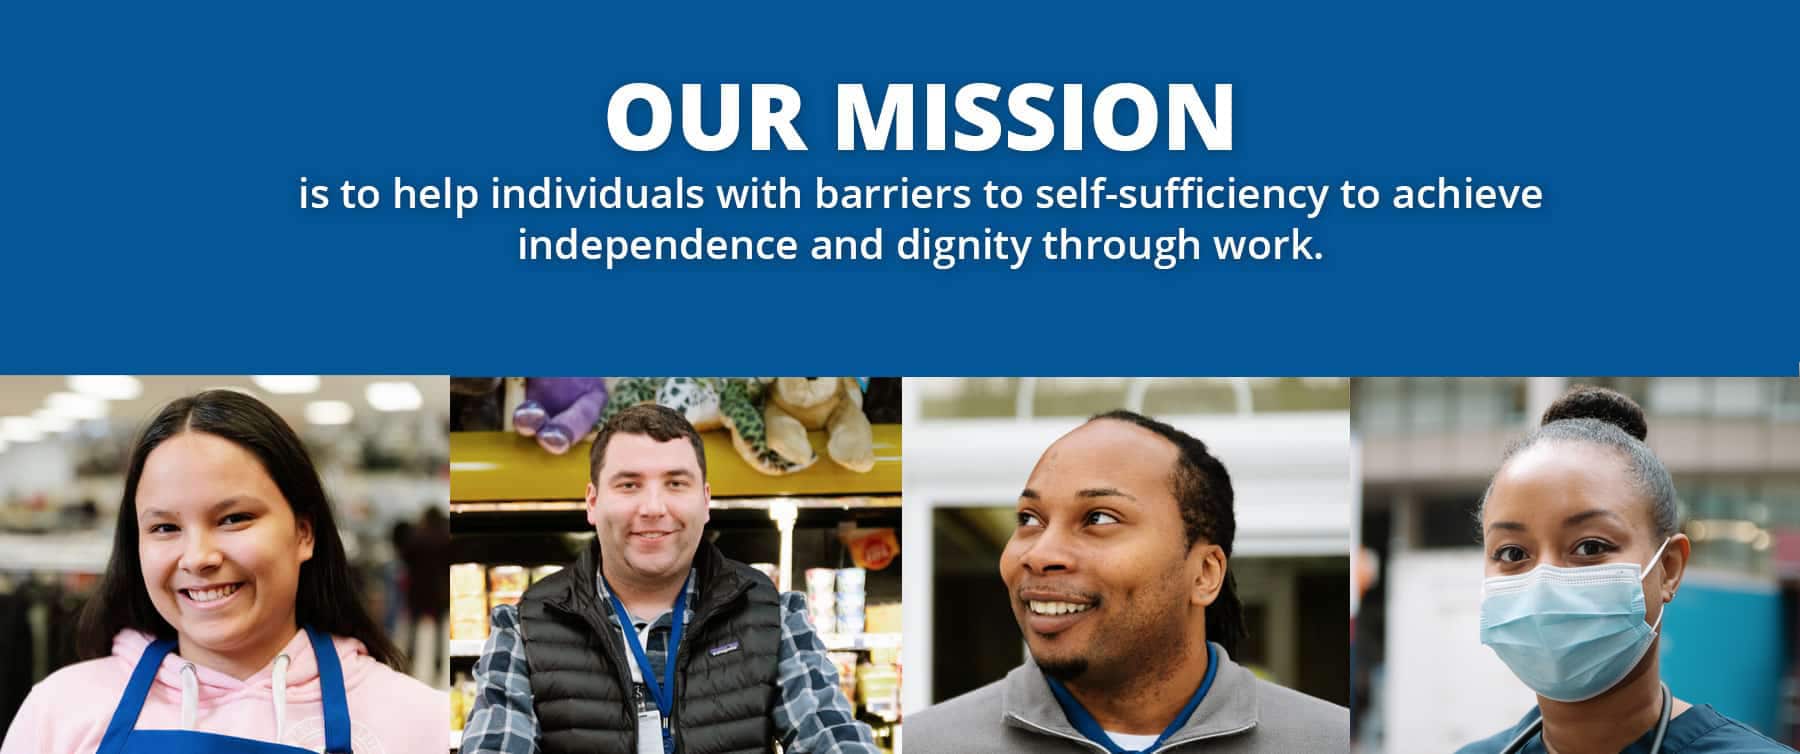 Our Mission is to help individuals with barriers to self-sufficiency to achieve independence and dignity through work.